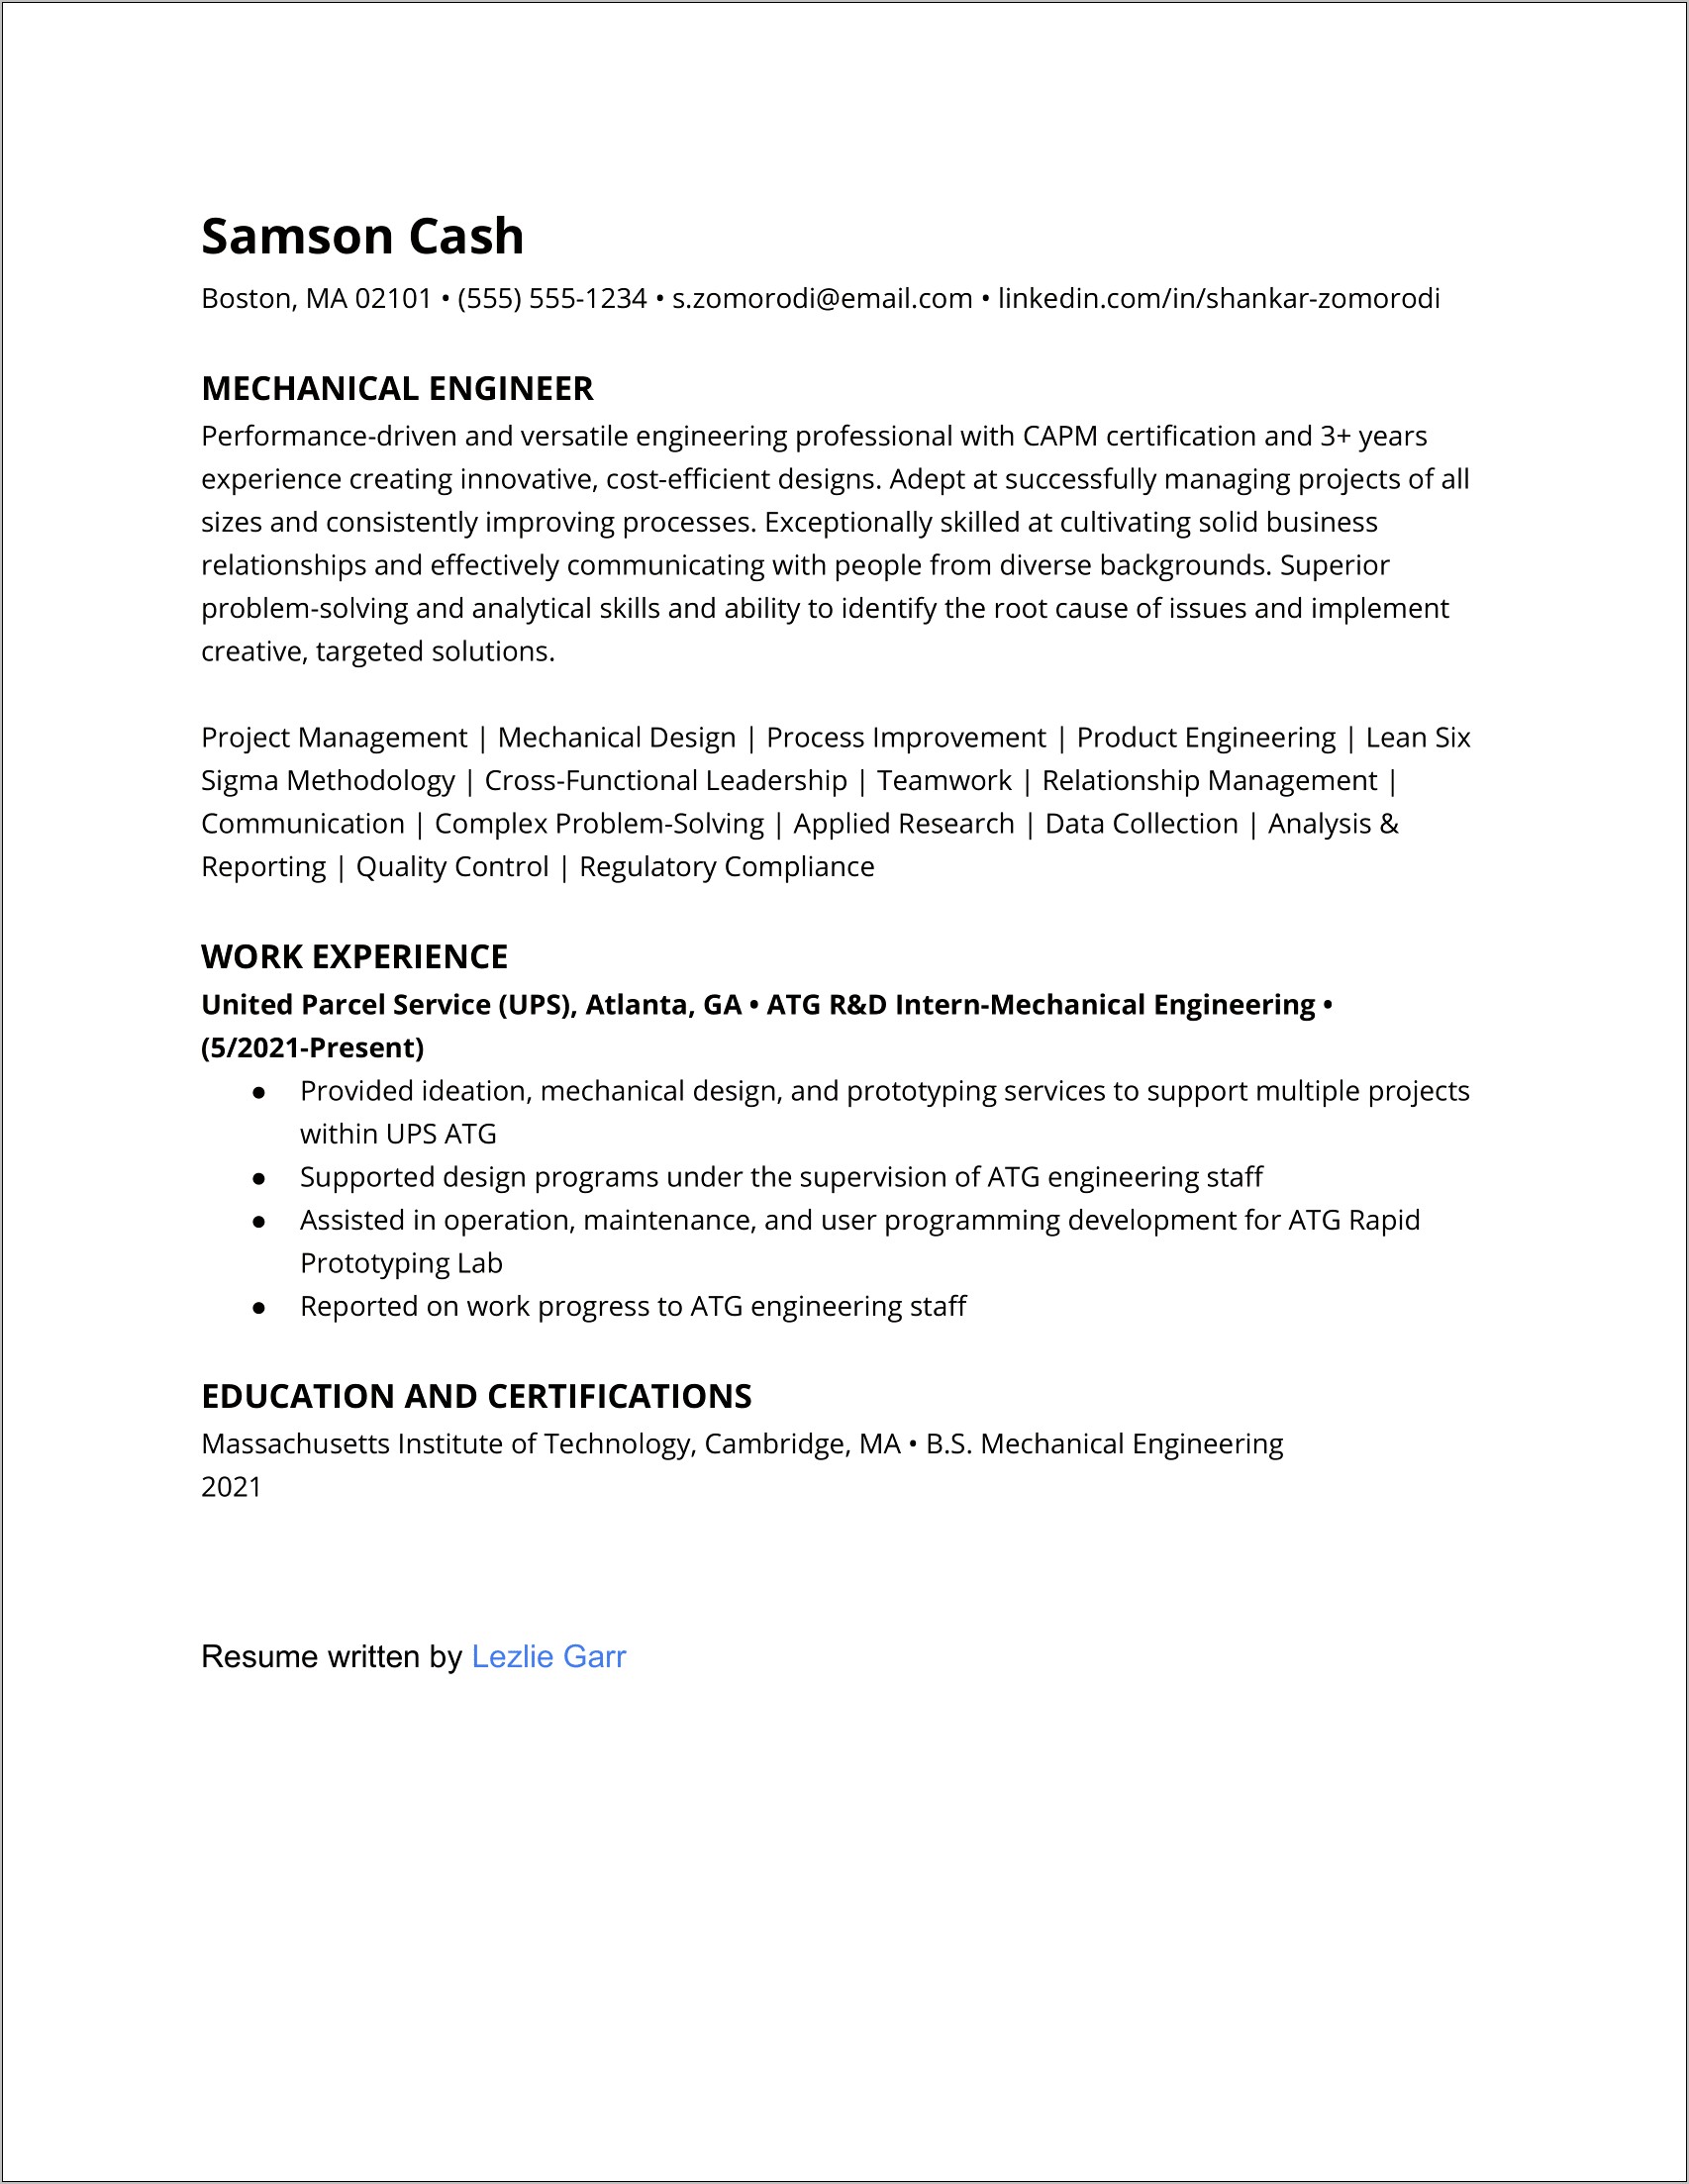 Sample Resume For An Entry Level Mechanical Enginee